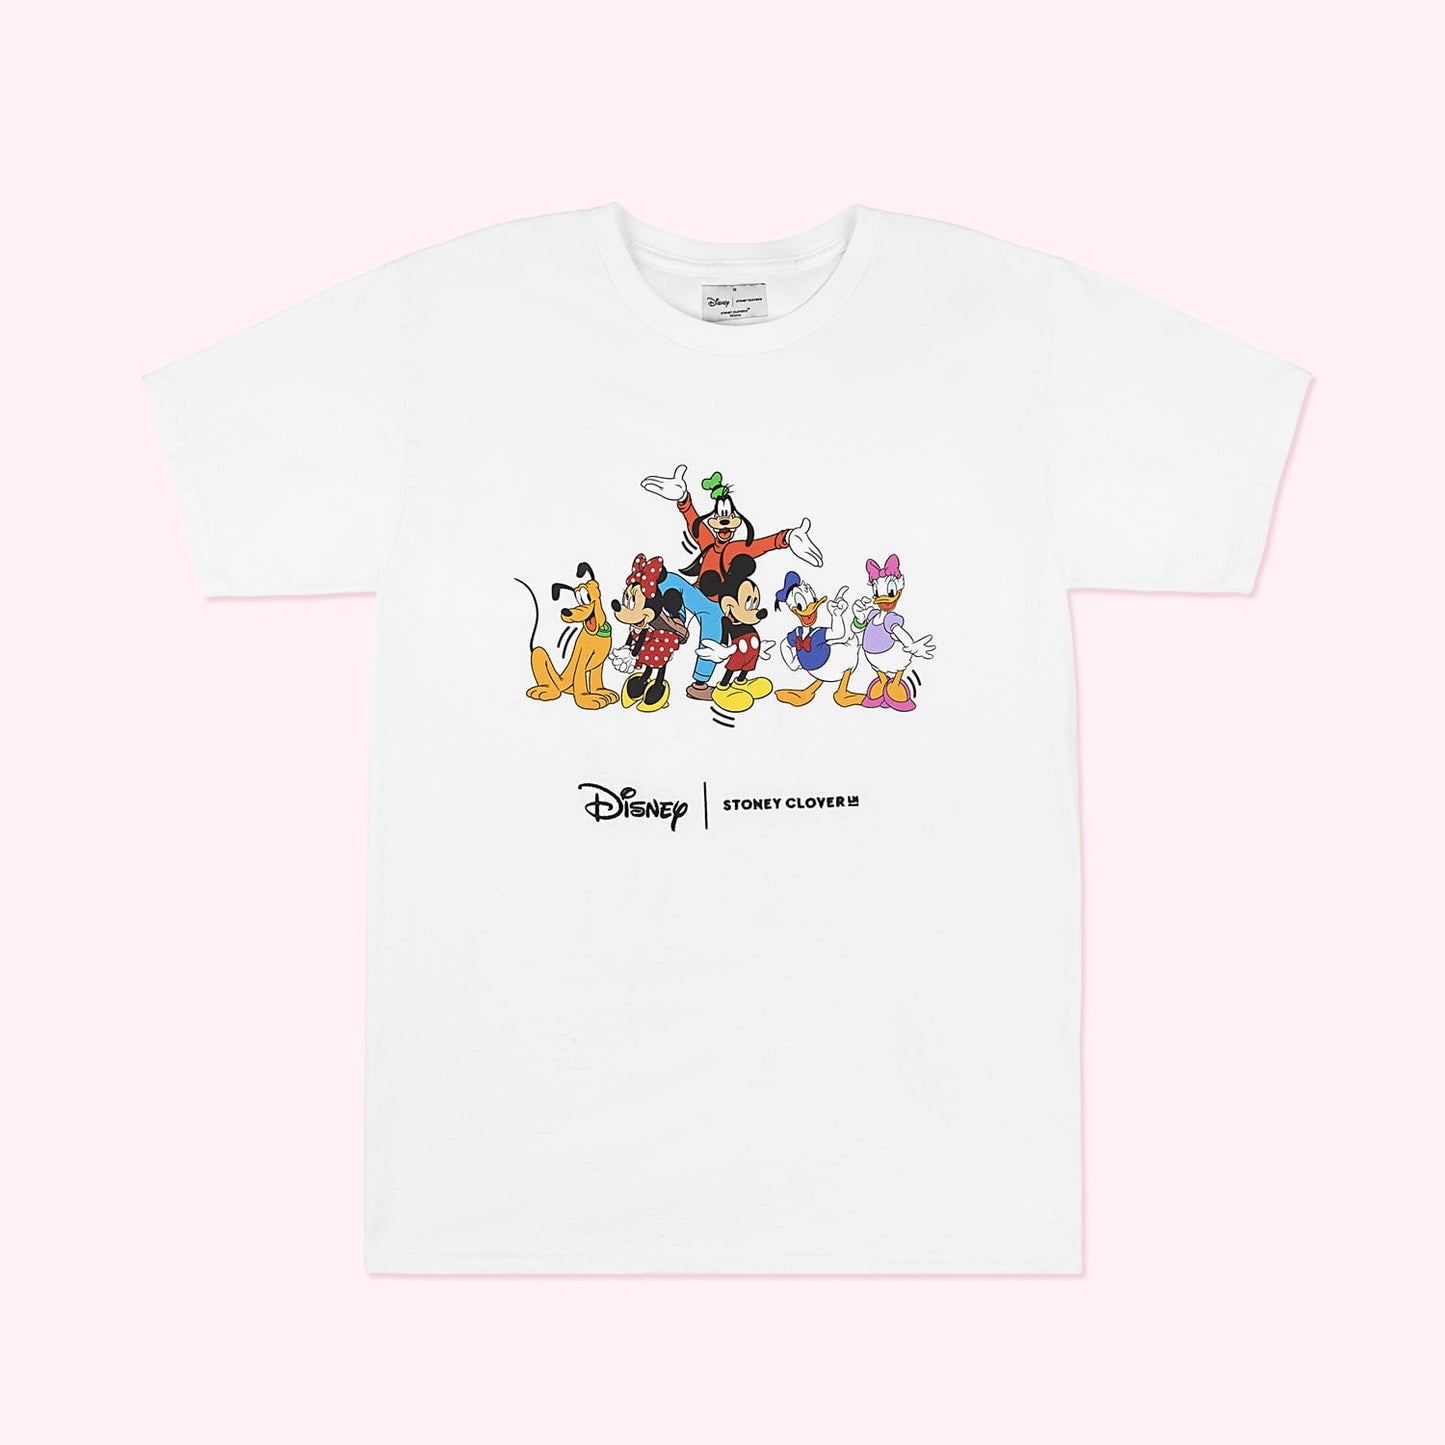 Louis Vuitton Mickey Mouse Disney T-Shirt Check more at https